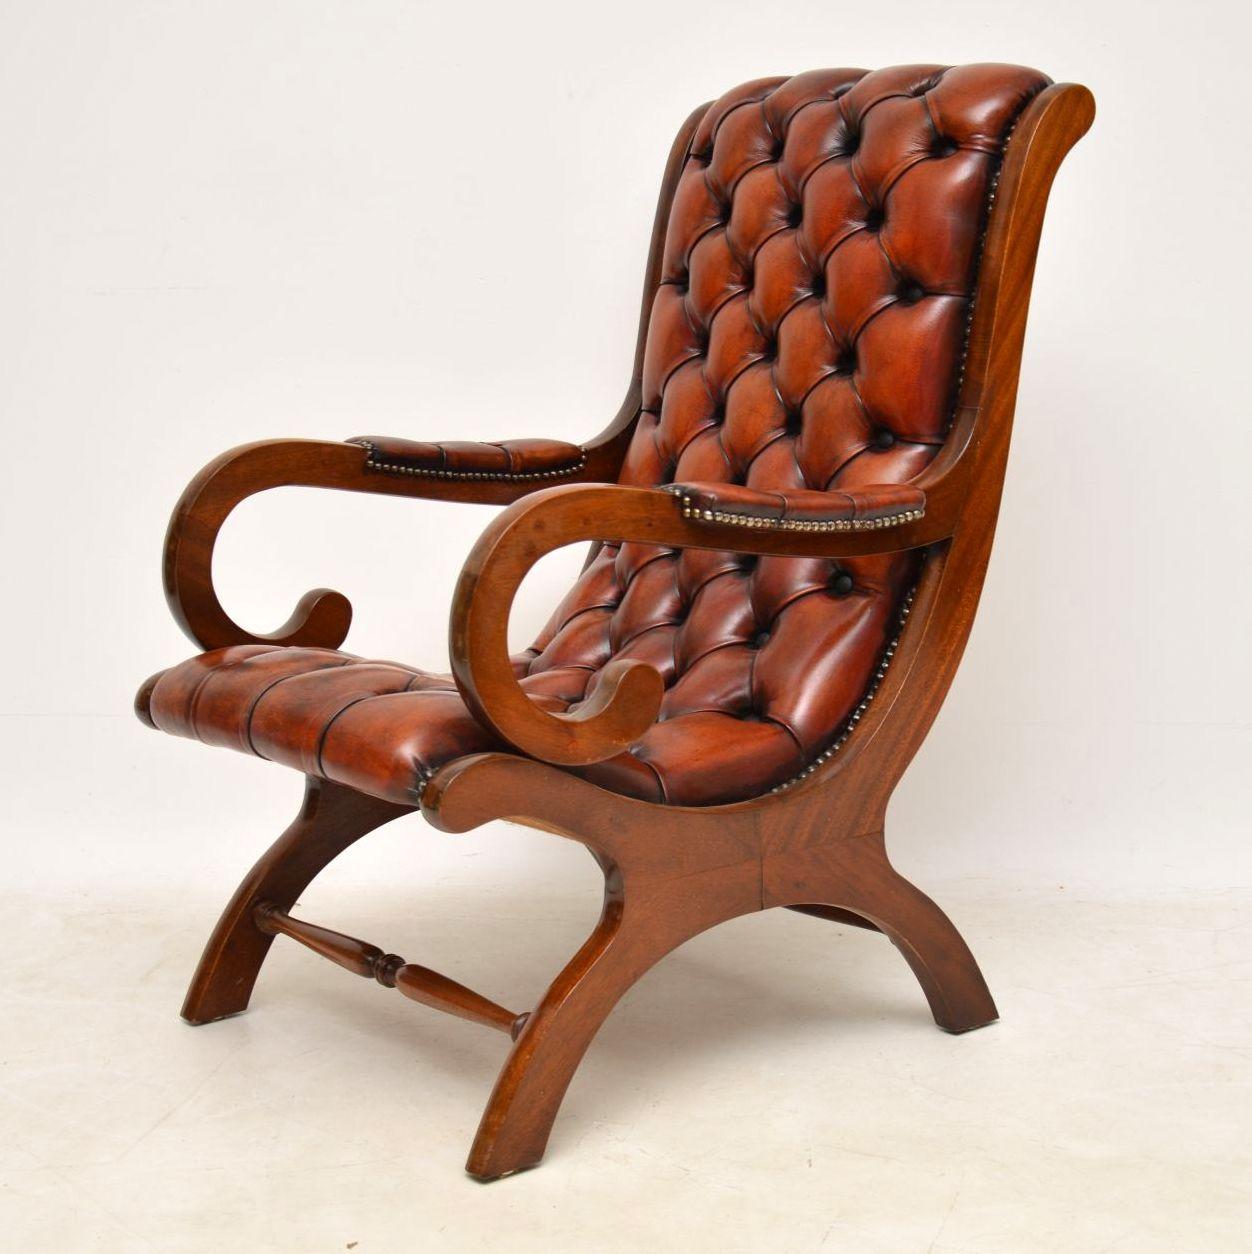 English Antique Regency Style Leather and Mahogany Armchair